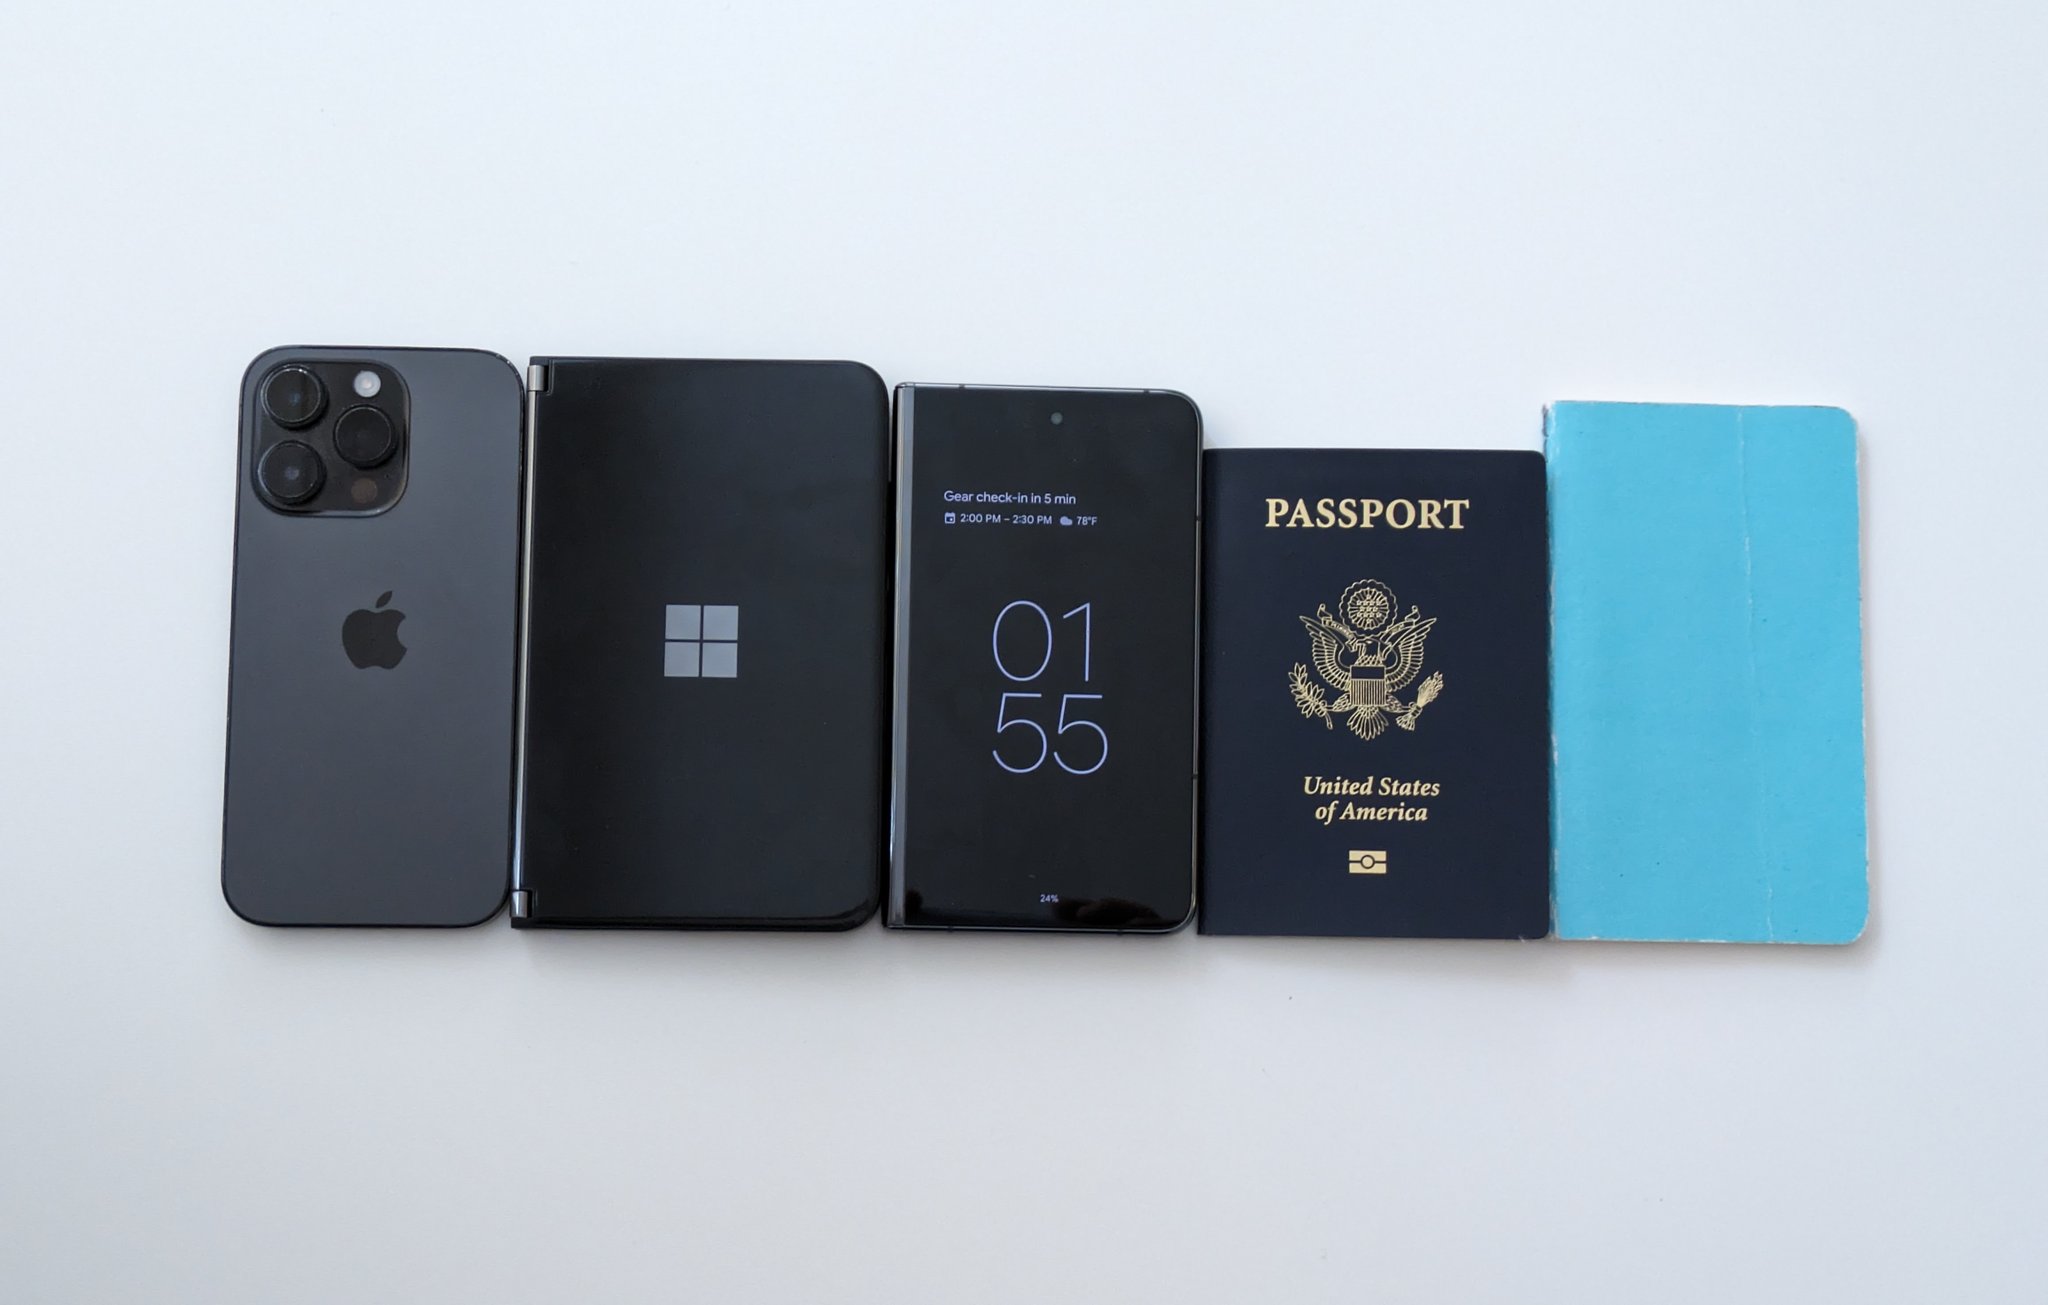 Ray Wong on X: Pixel Fold size comparison: From left to right: iPhone 14  Pro, Surface Duo, Pixel Fold, US passport, notebook   / X